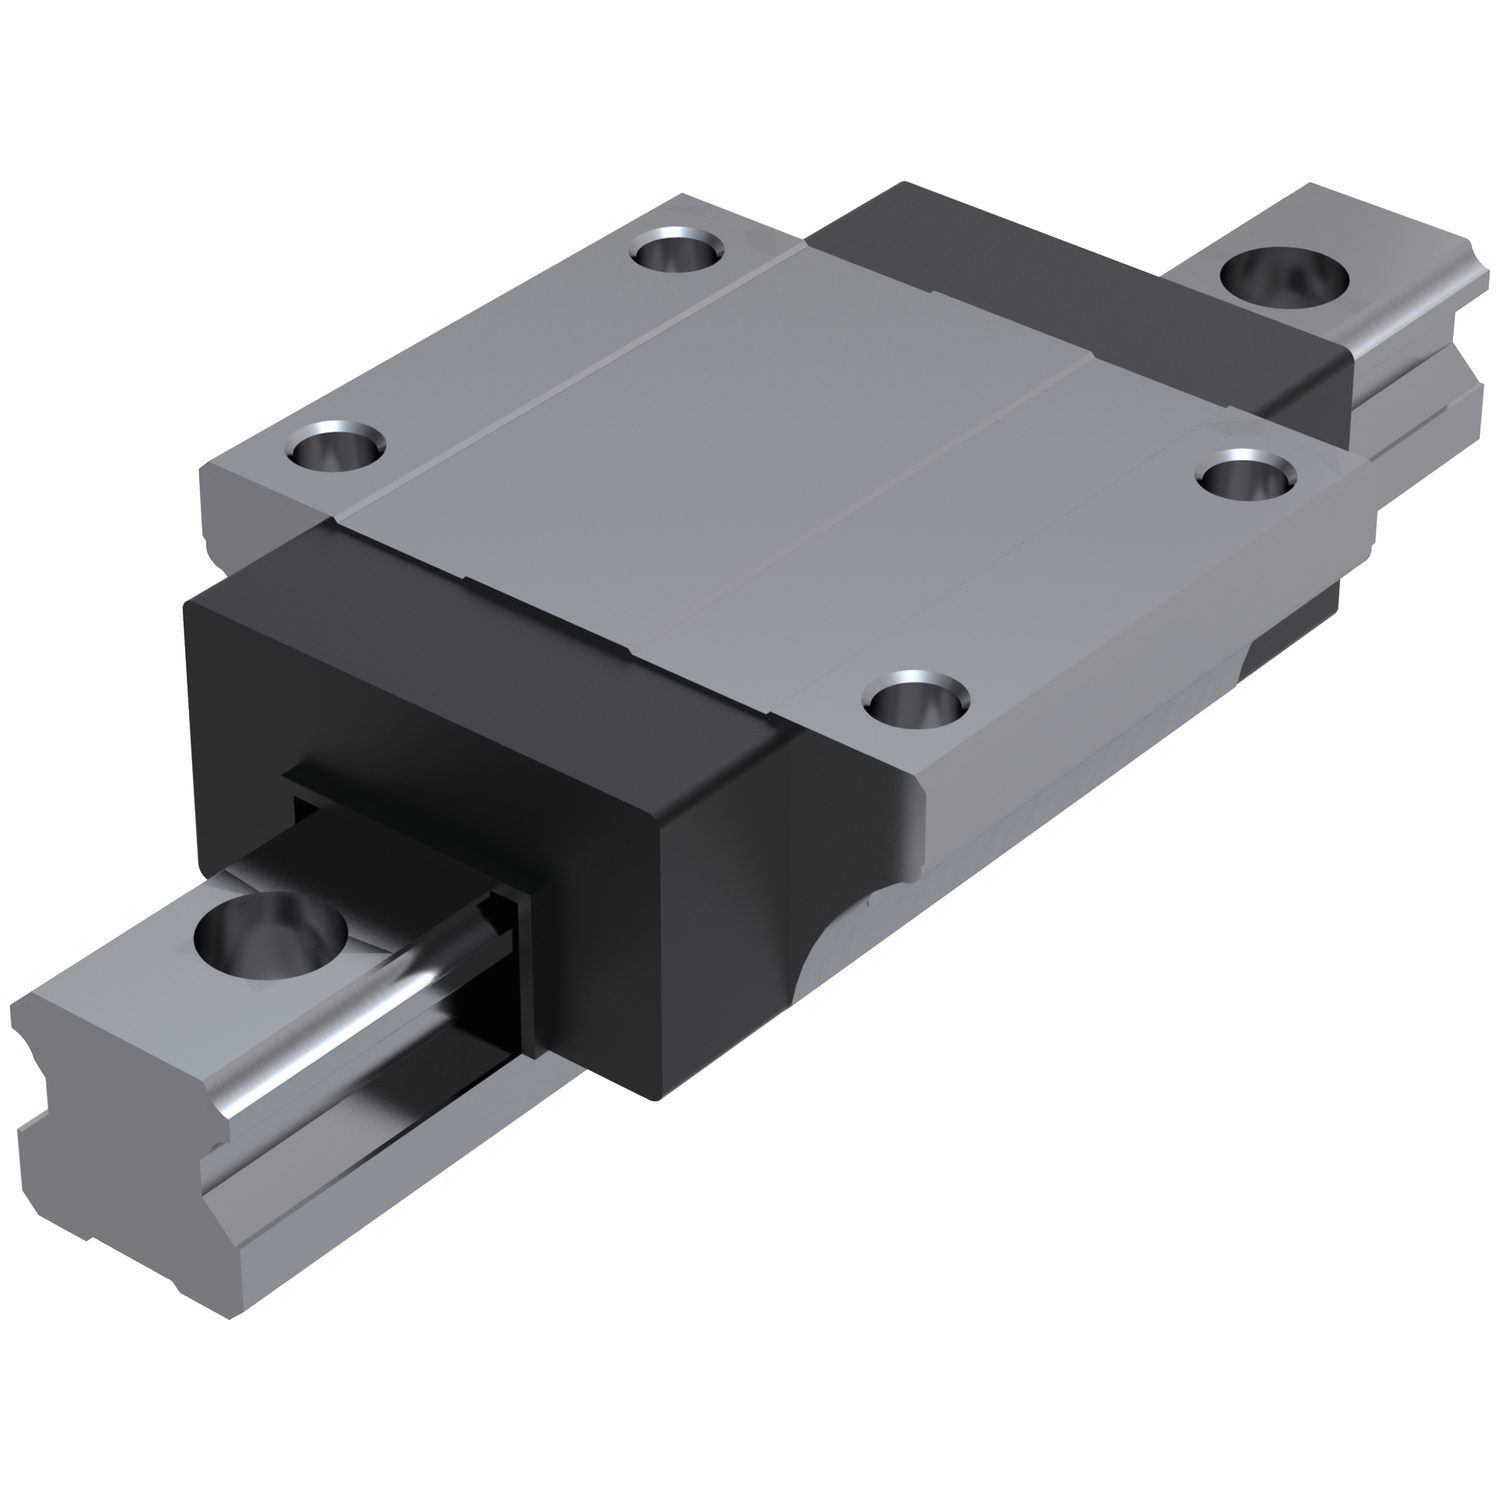 Linear Guideways Our most popular linear guideway systems with either flanged or un-flanged carriages (L1016.F or L1016.U). Width sizes 15, 20, 25, 30, 35, 45 and 55mm. Lengths up to 4 metres and rear-fixing rails also stocked (L1016.RF). Ultra-low profile carriages also available (L1016.UL).